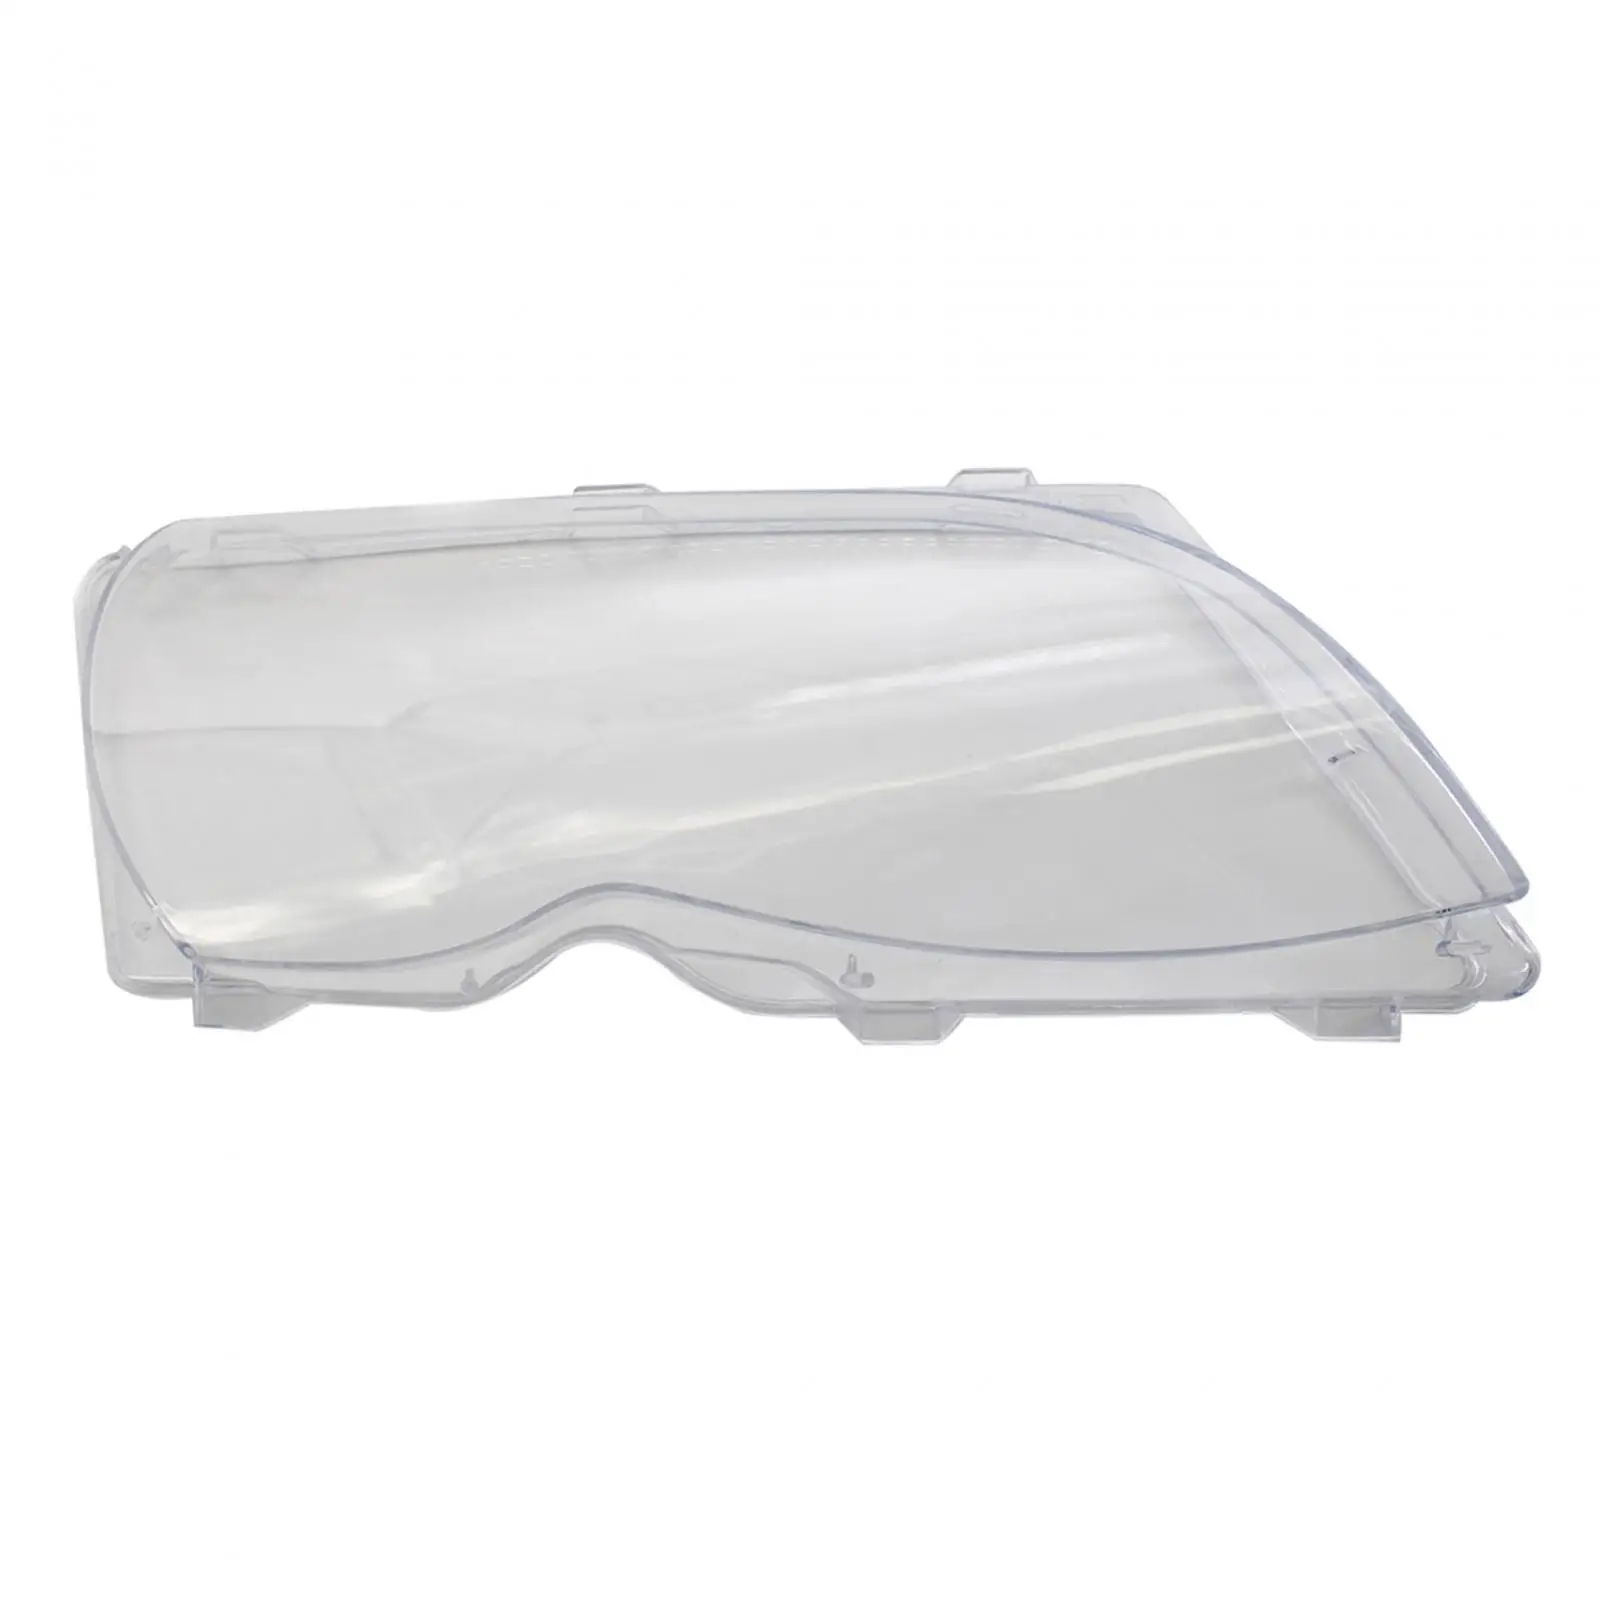 Headlight Lens Decor Cover Spare Parts Auto Accessory Replaces Lampshade Headlight Cover for BMW E46 4 Door 2002-2005